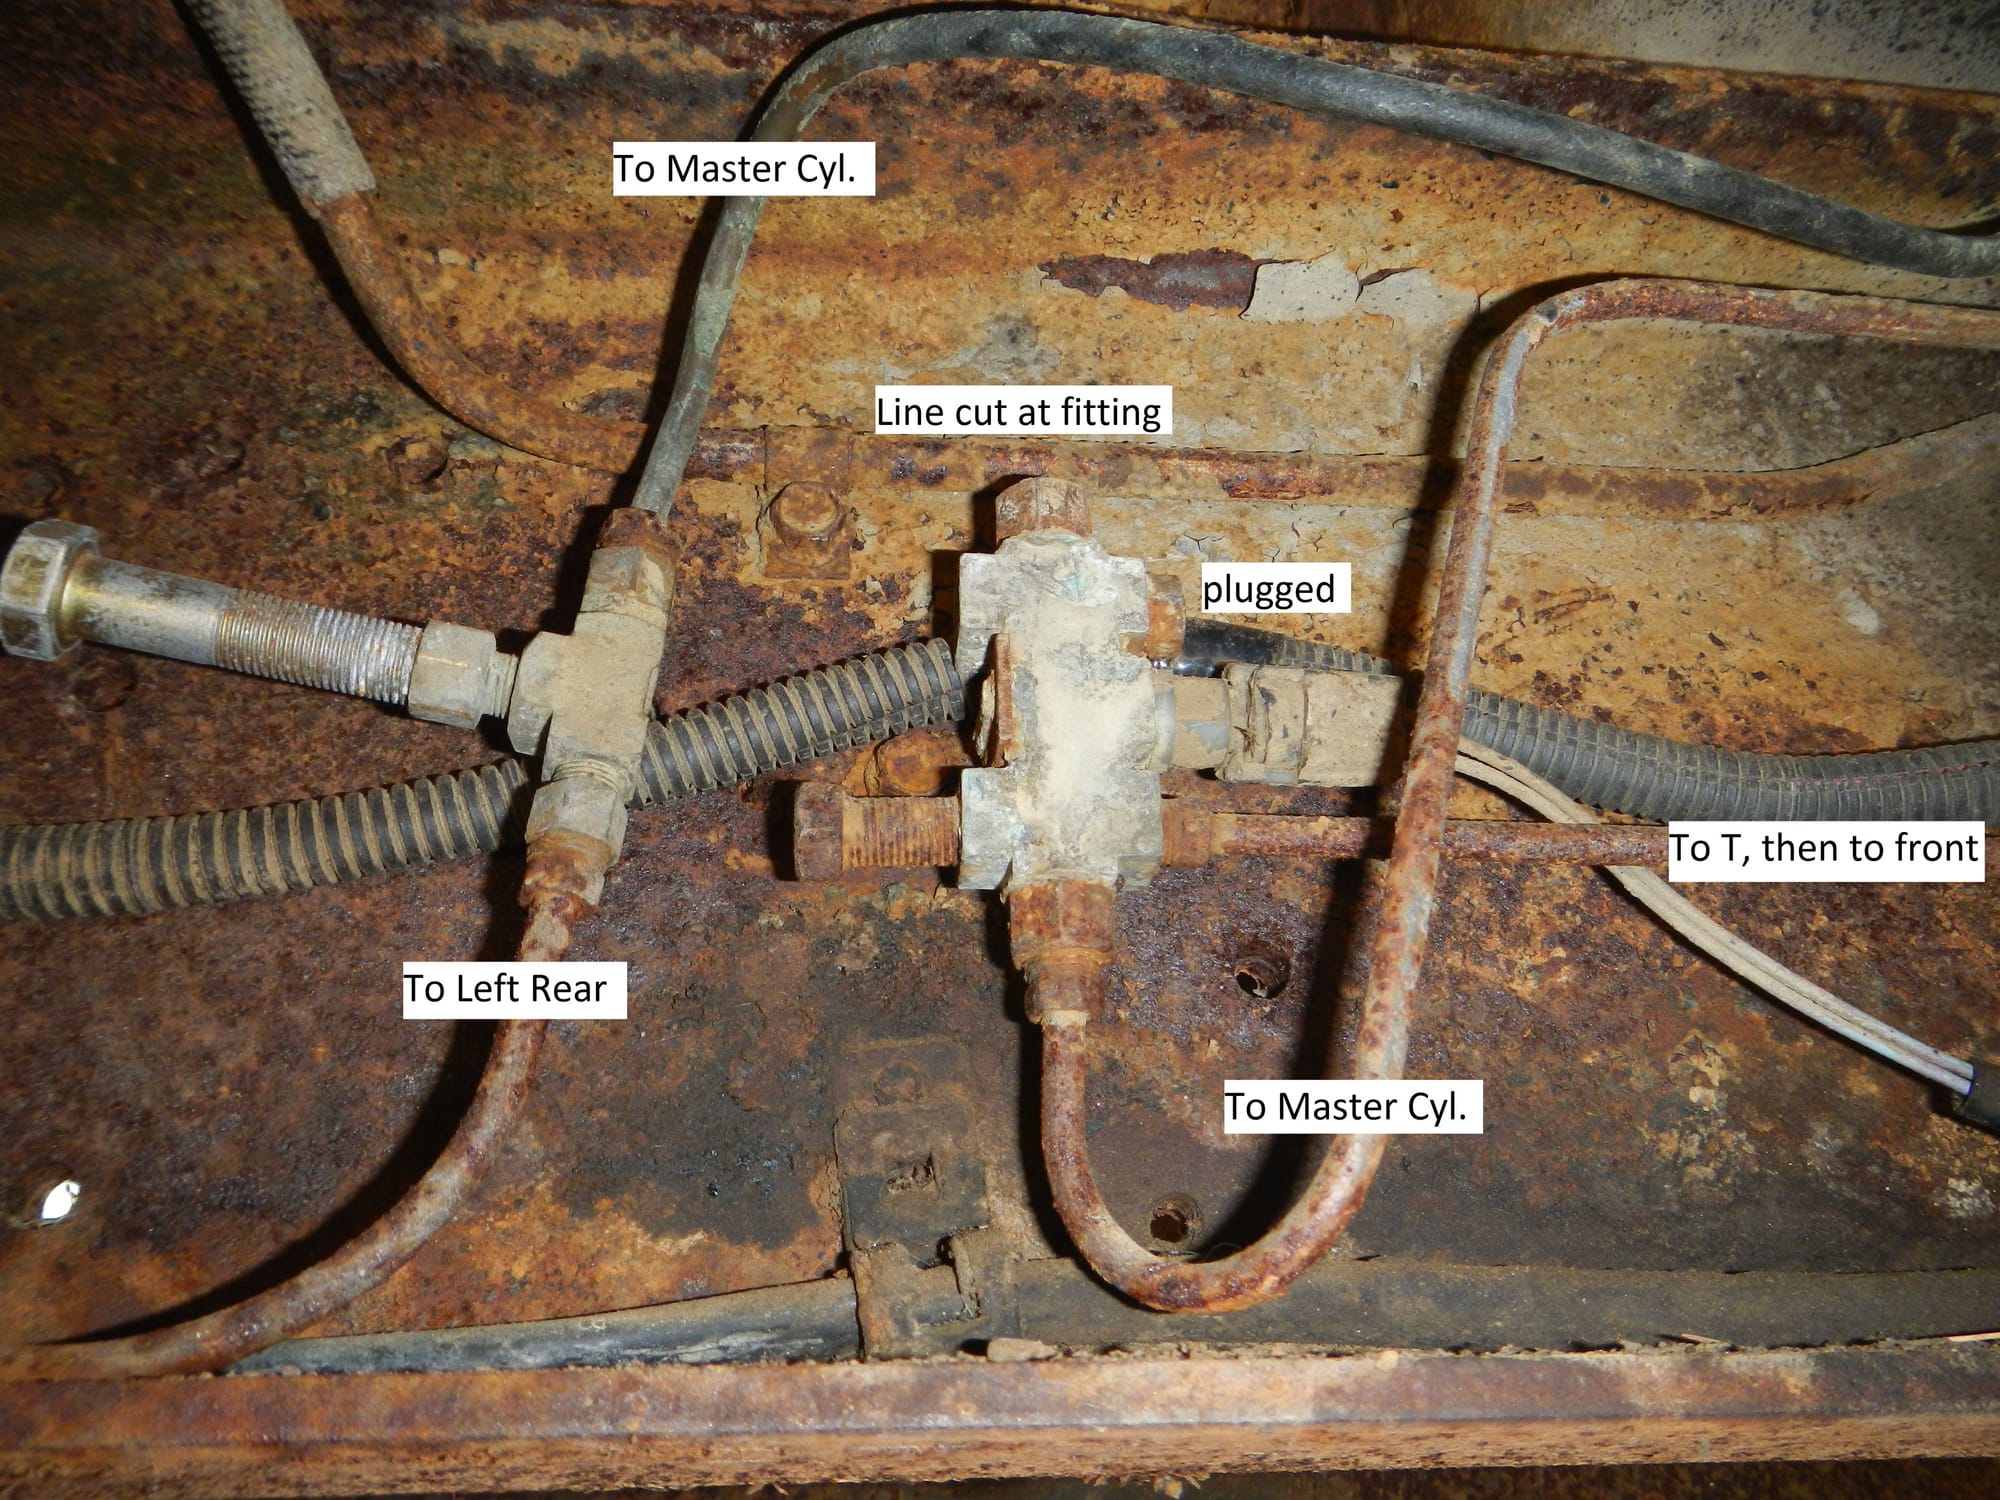 1972 F600 brake line madness Ford Truck Enthusiasts Forums